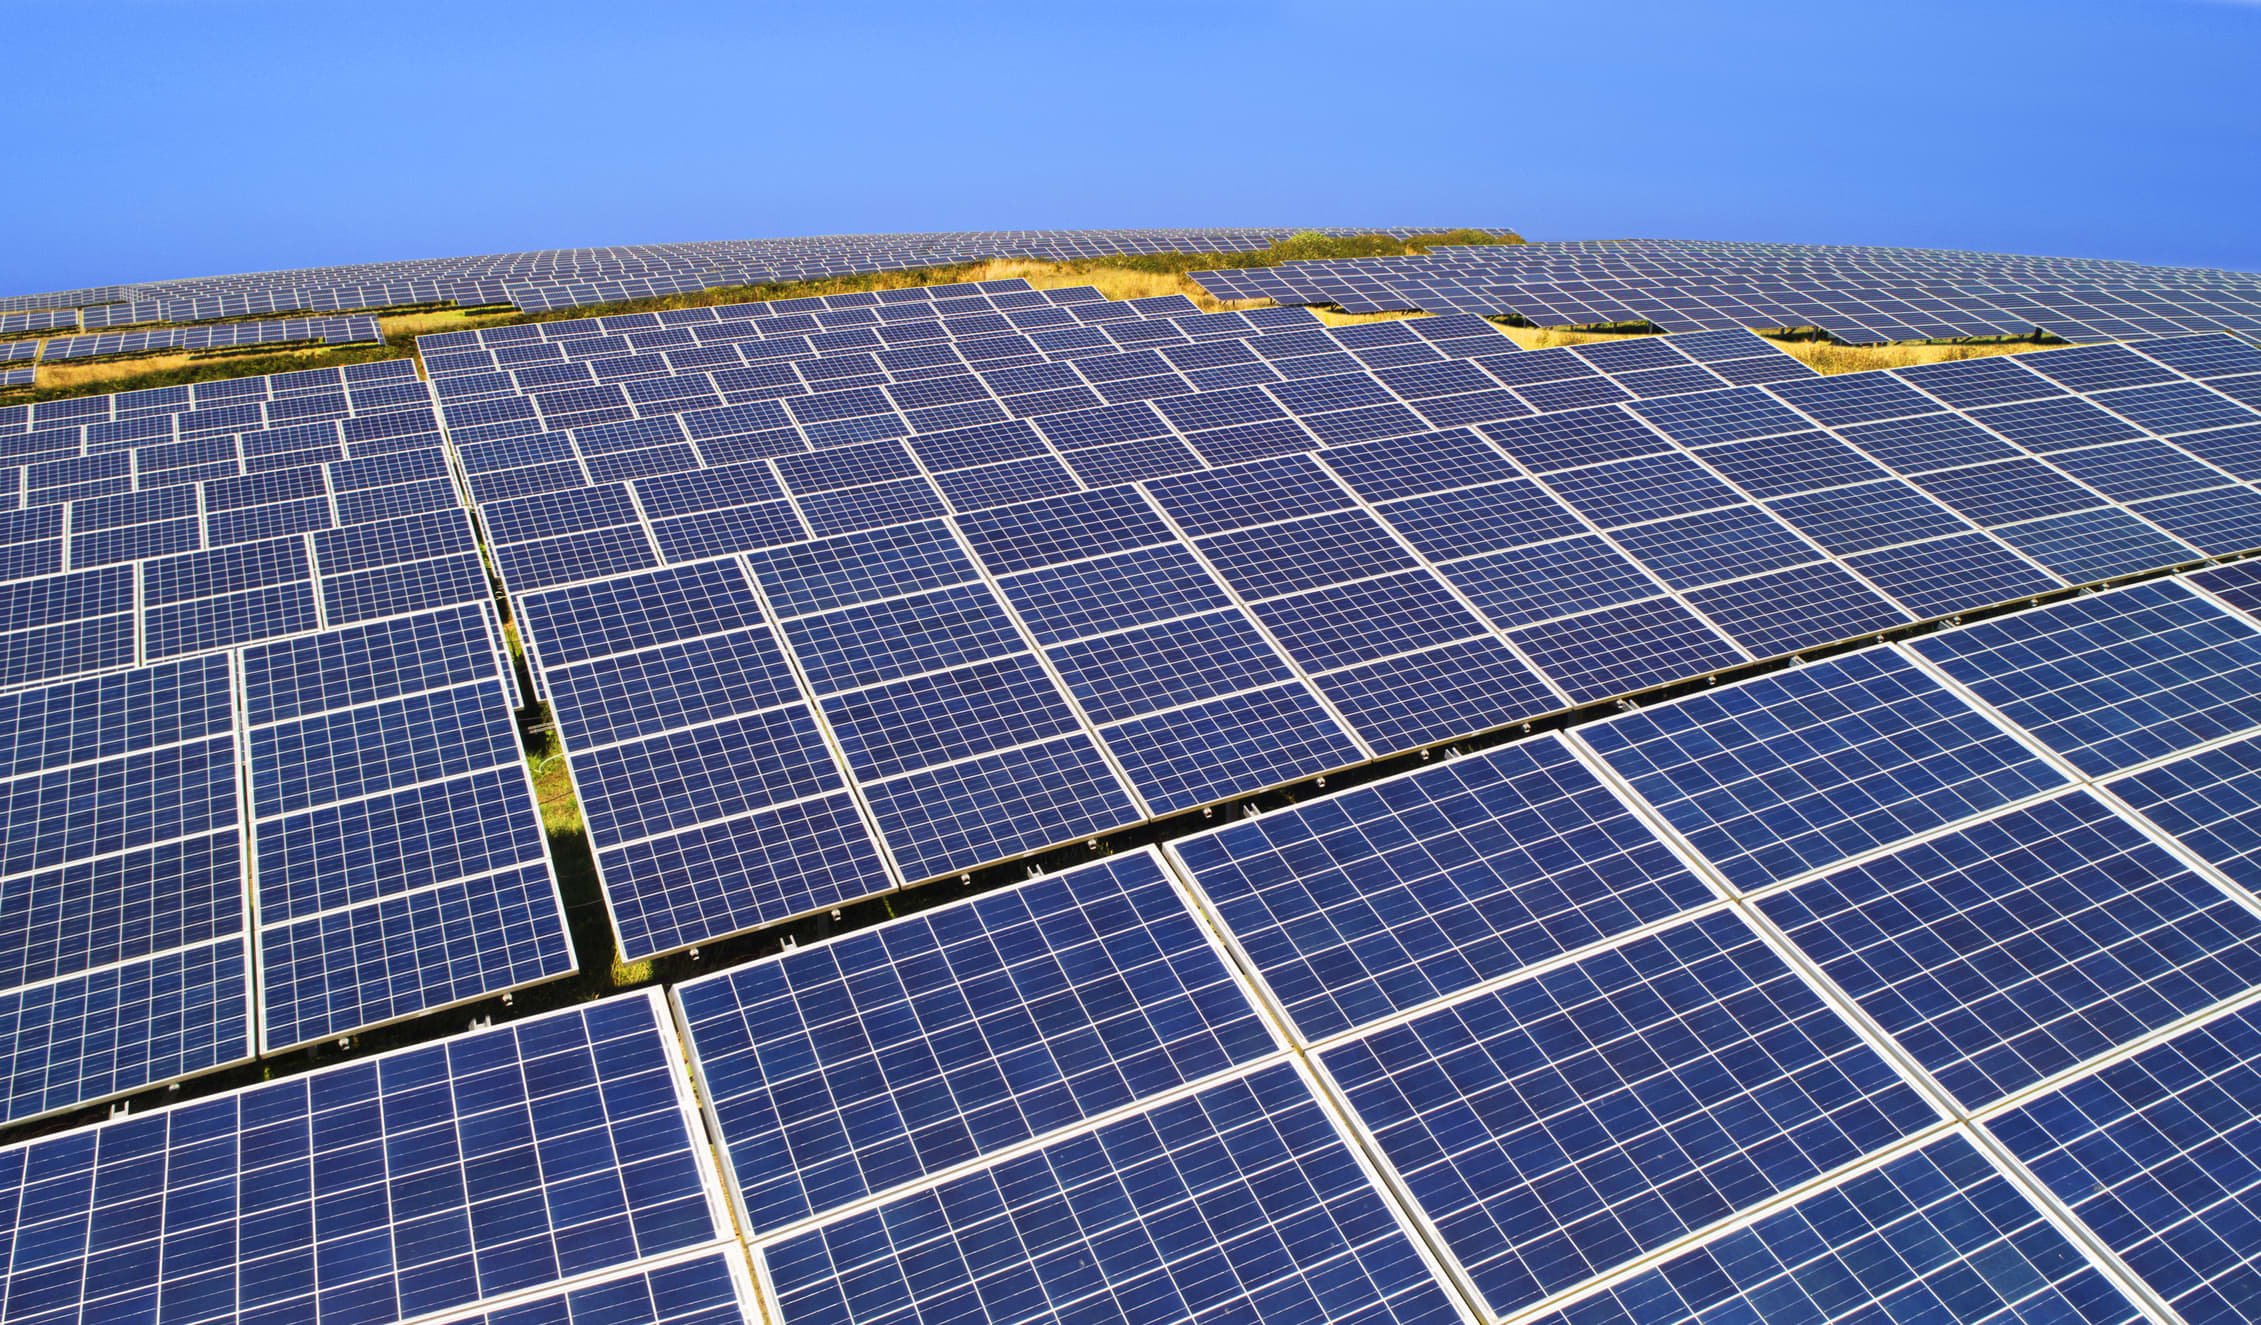 Solar prices jump as supply chain issues and raw material costs weigh